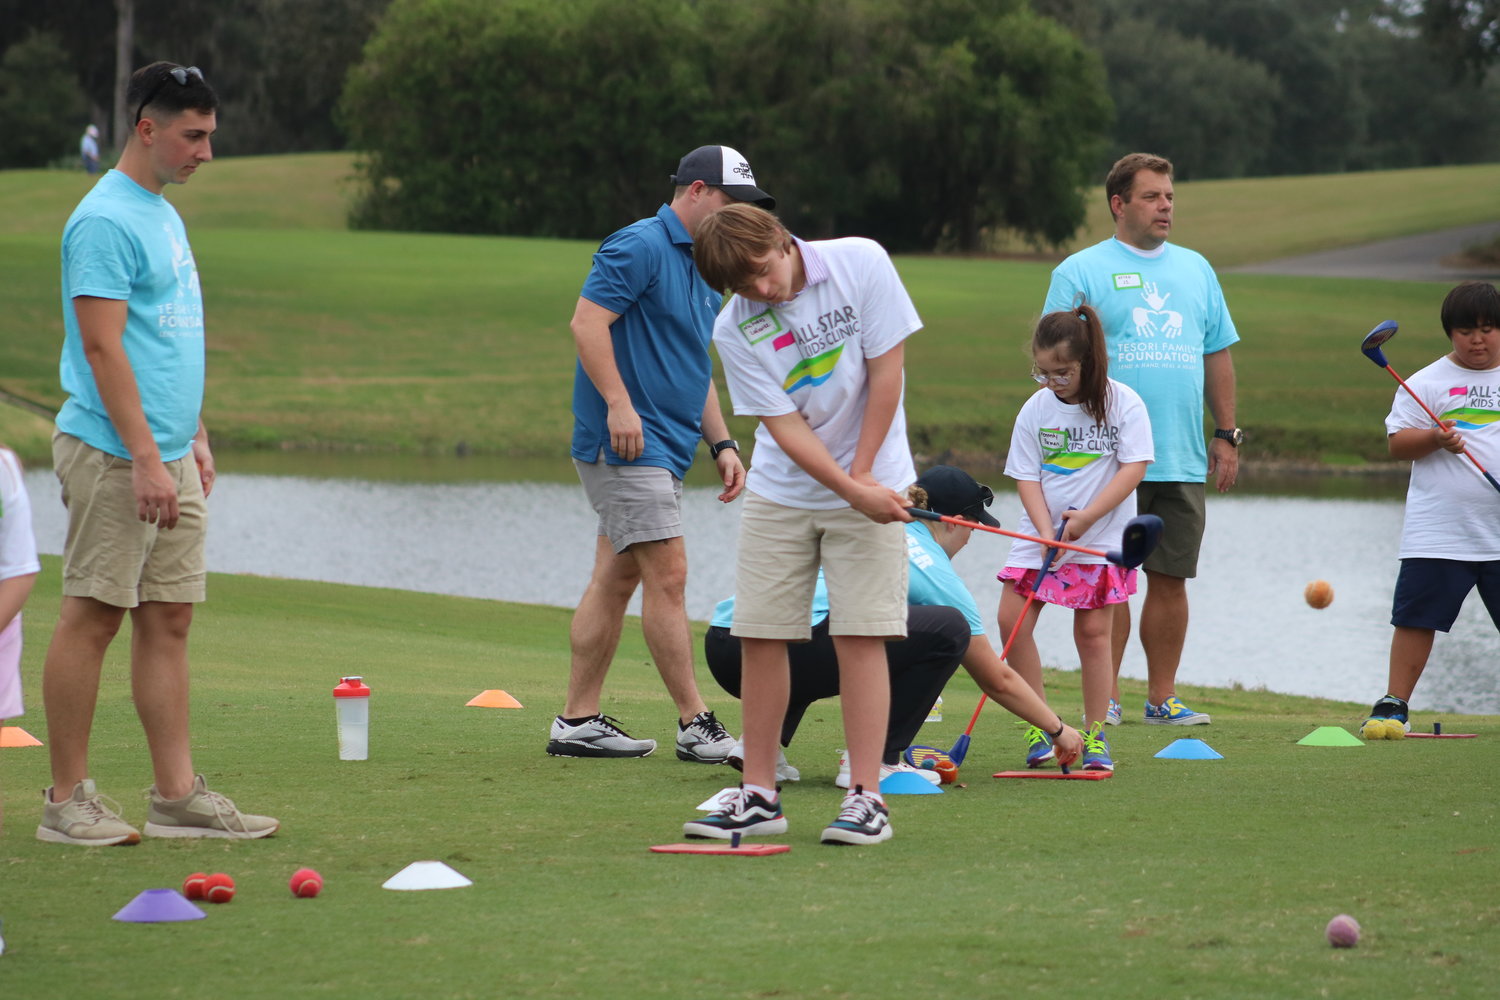 The Tesori Foundation hosted one of its all-star kids clinics at TPC Sawgrass Oct. 12.